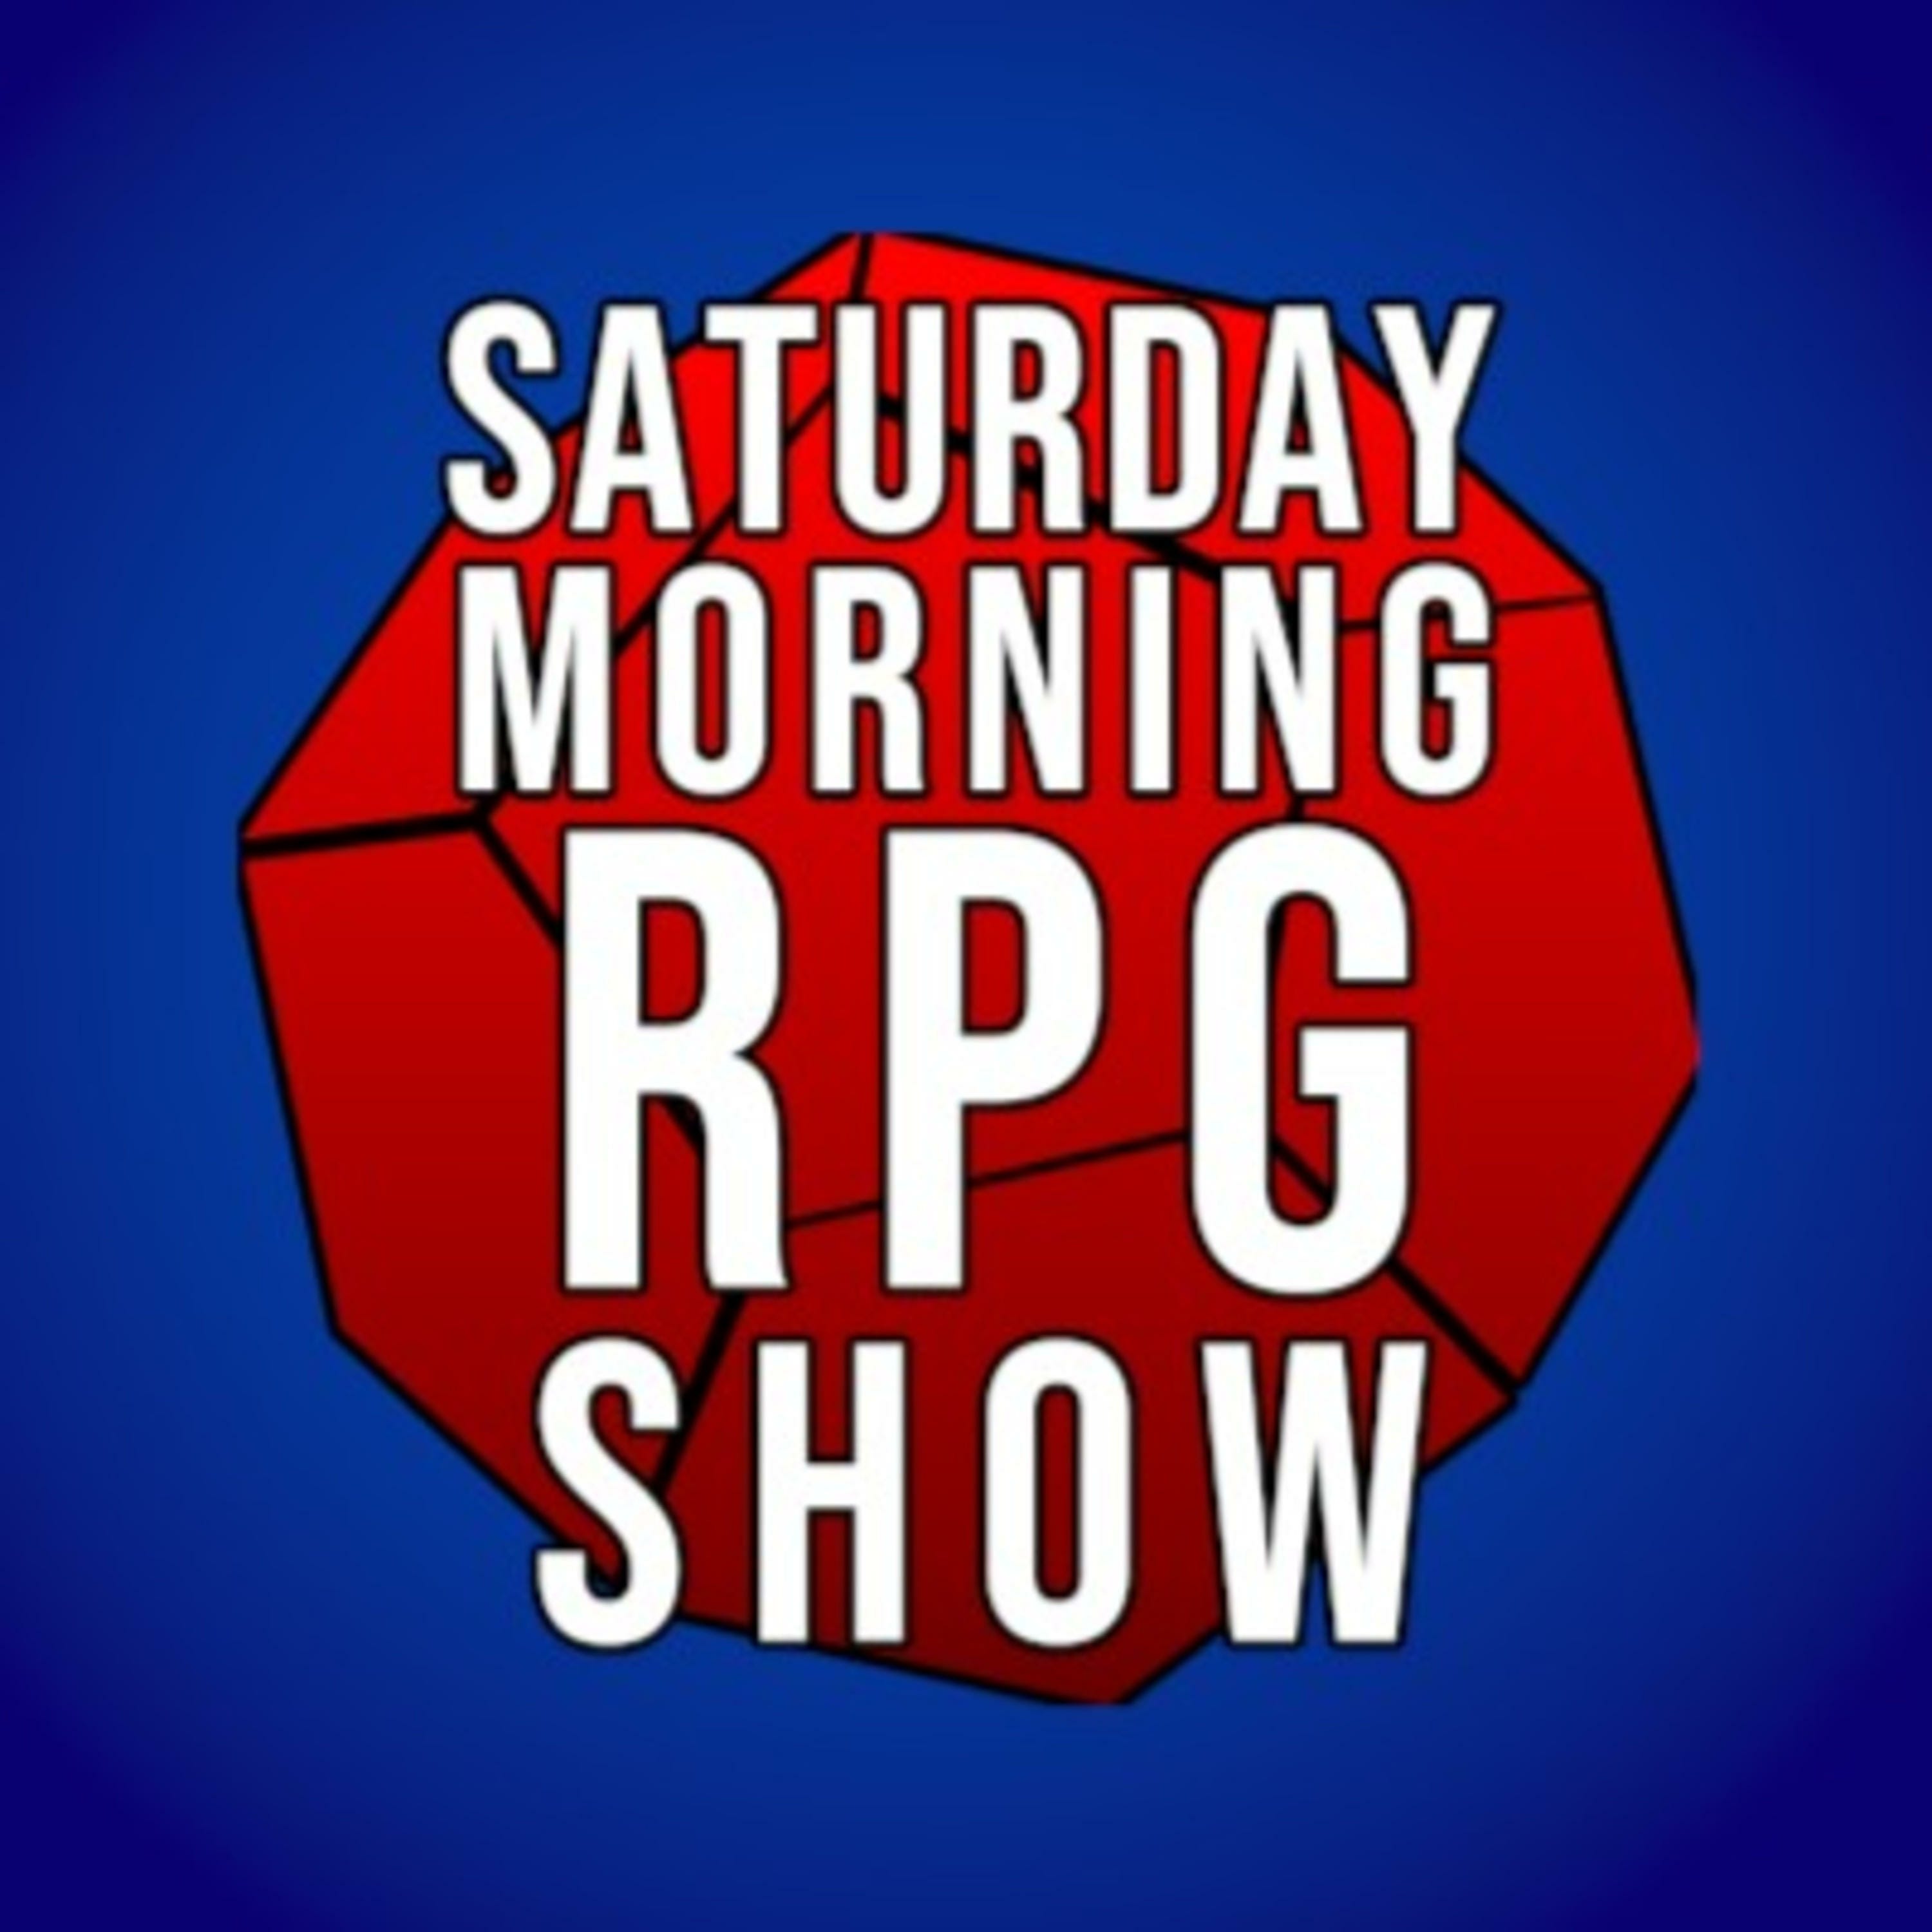 Ep 175 - Do universal rpg systems work?